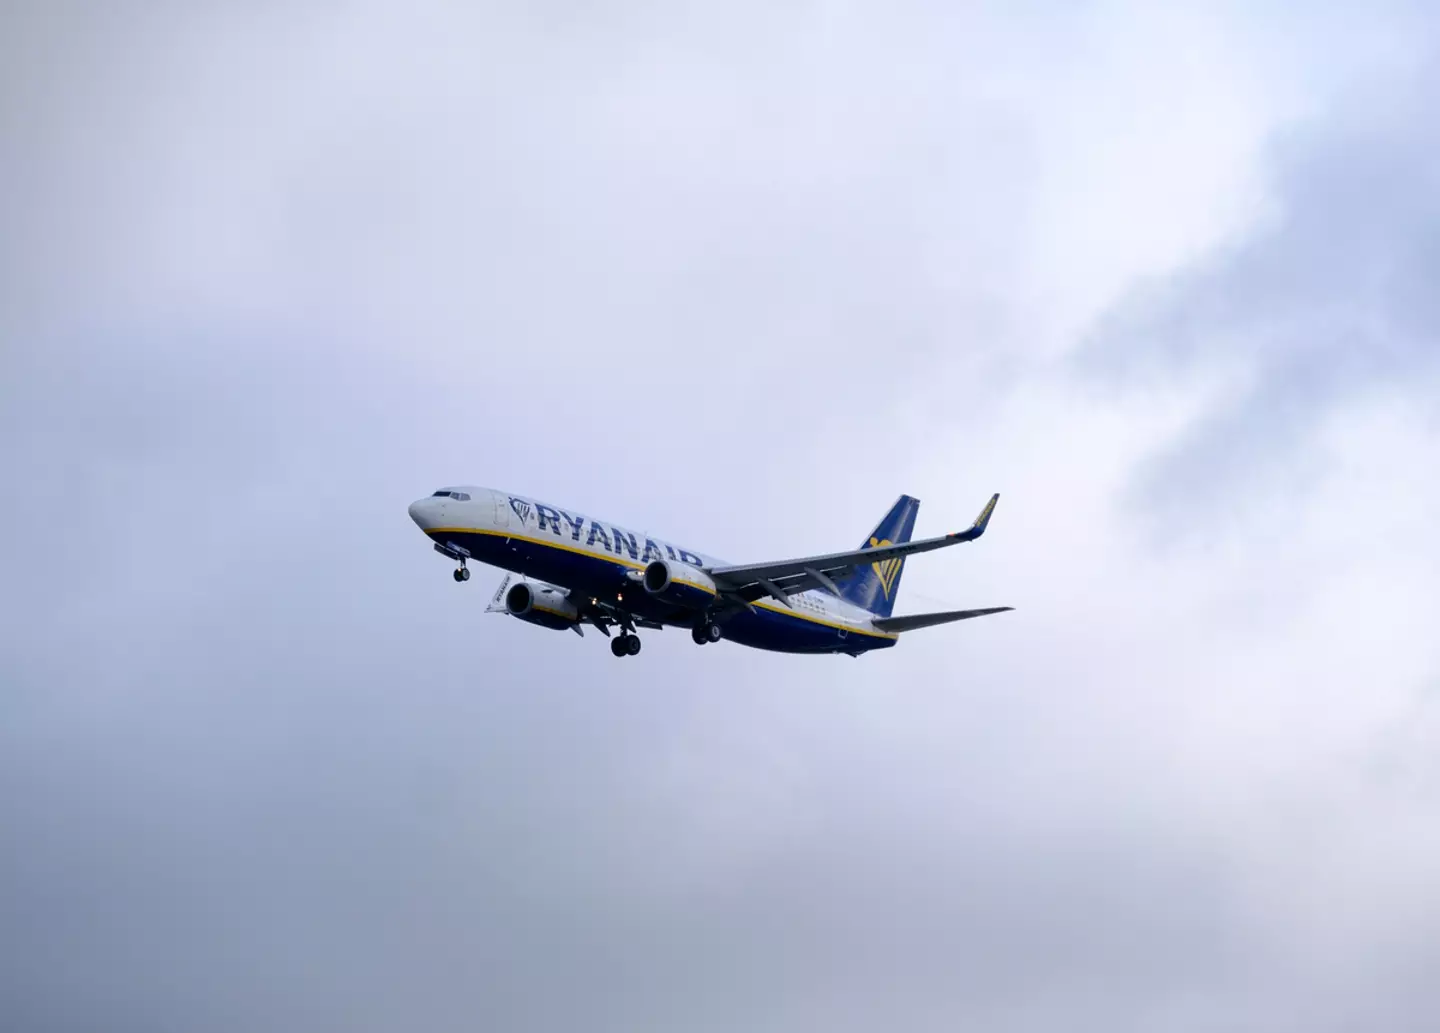 Ryanair passengers - who travelling from Manchester to Dublin on Sunday (21 January) - ended up getting diverted to Paris.